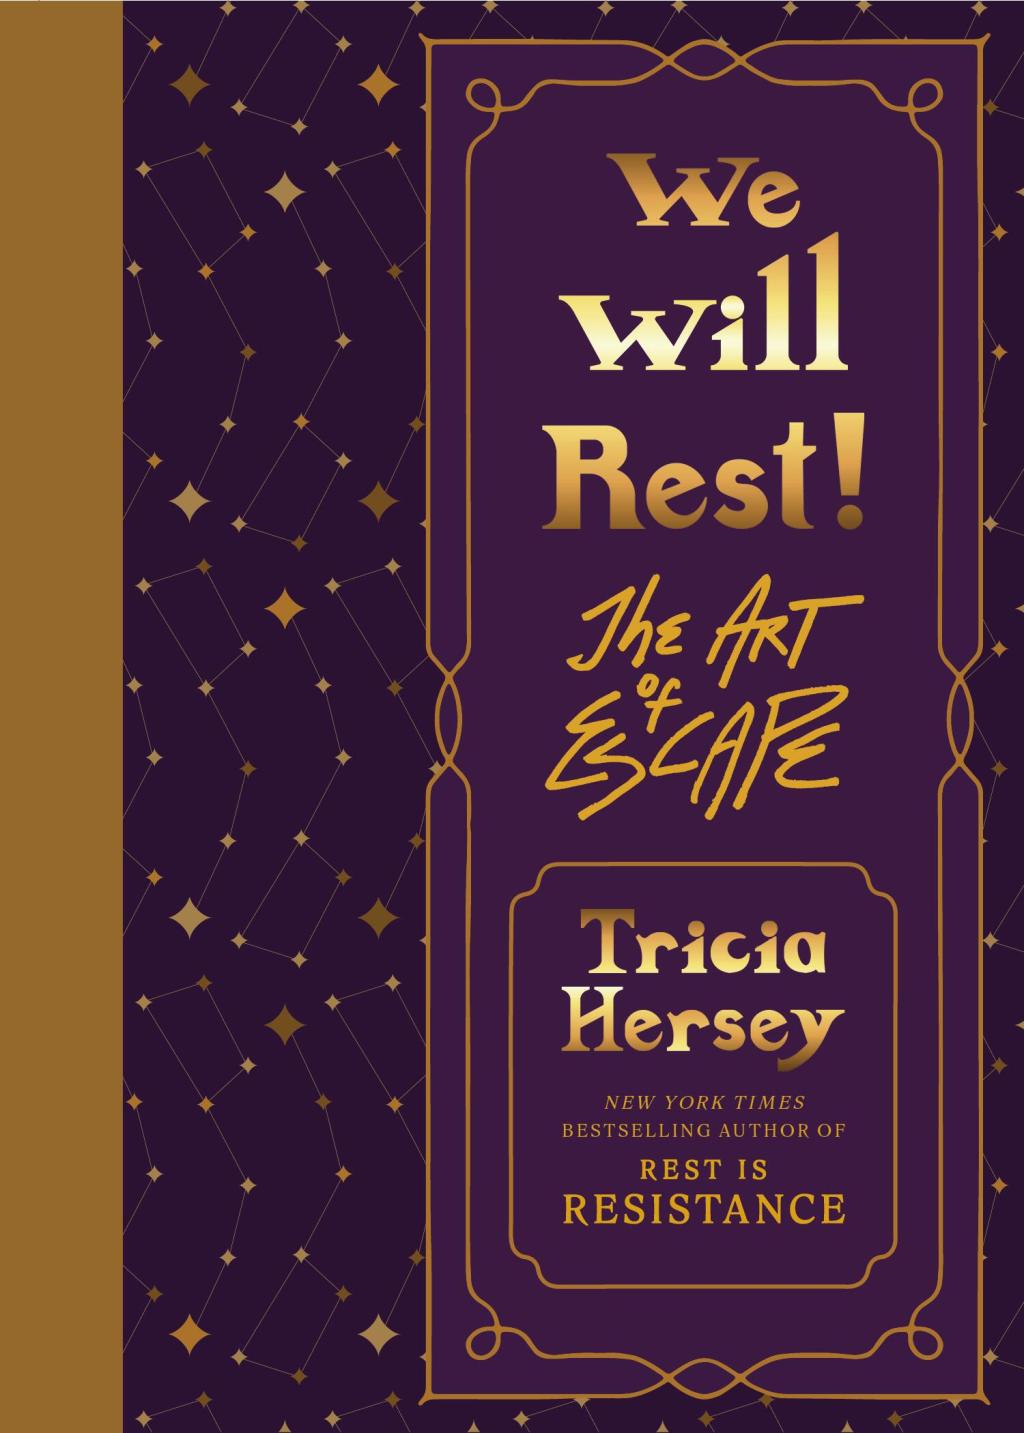 We Will Rest! The Art of Escape by Tricia Hersey